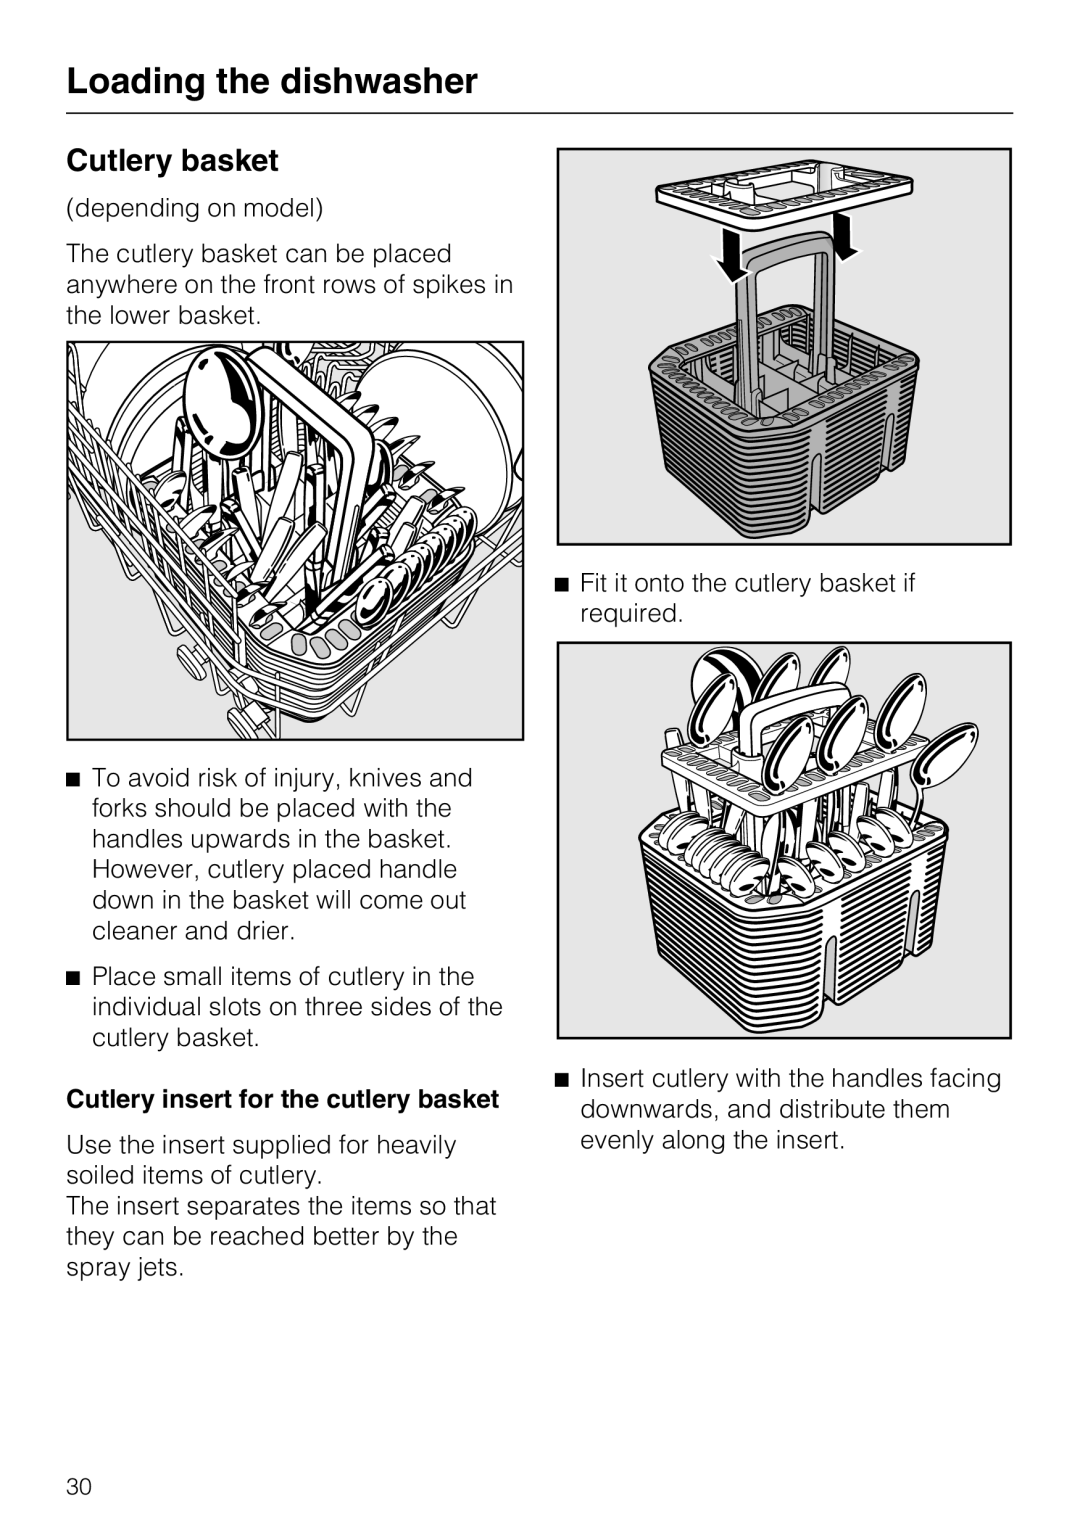 Miele G 5705, G 5700 operating instructions Cutlery basket, Loading the dishwasher, Cutlery insert for the cutlery basket 